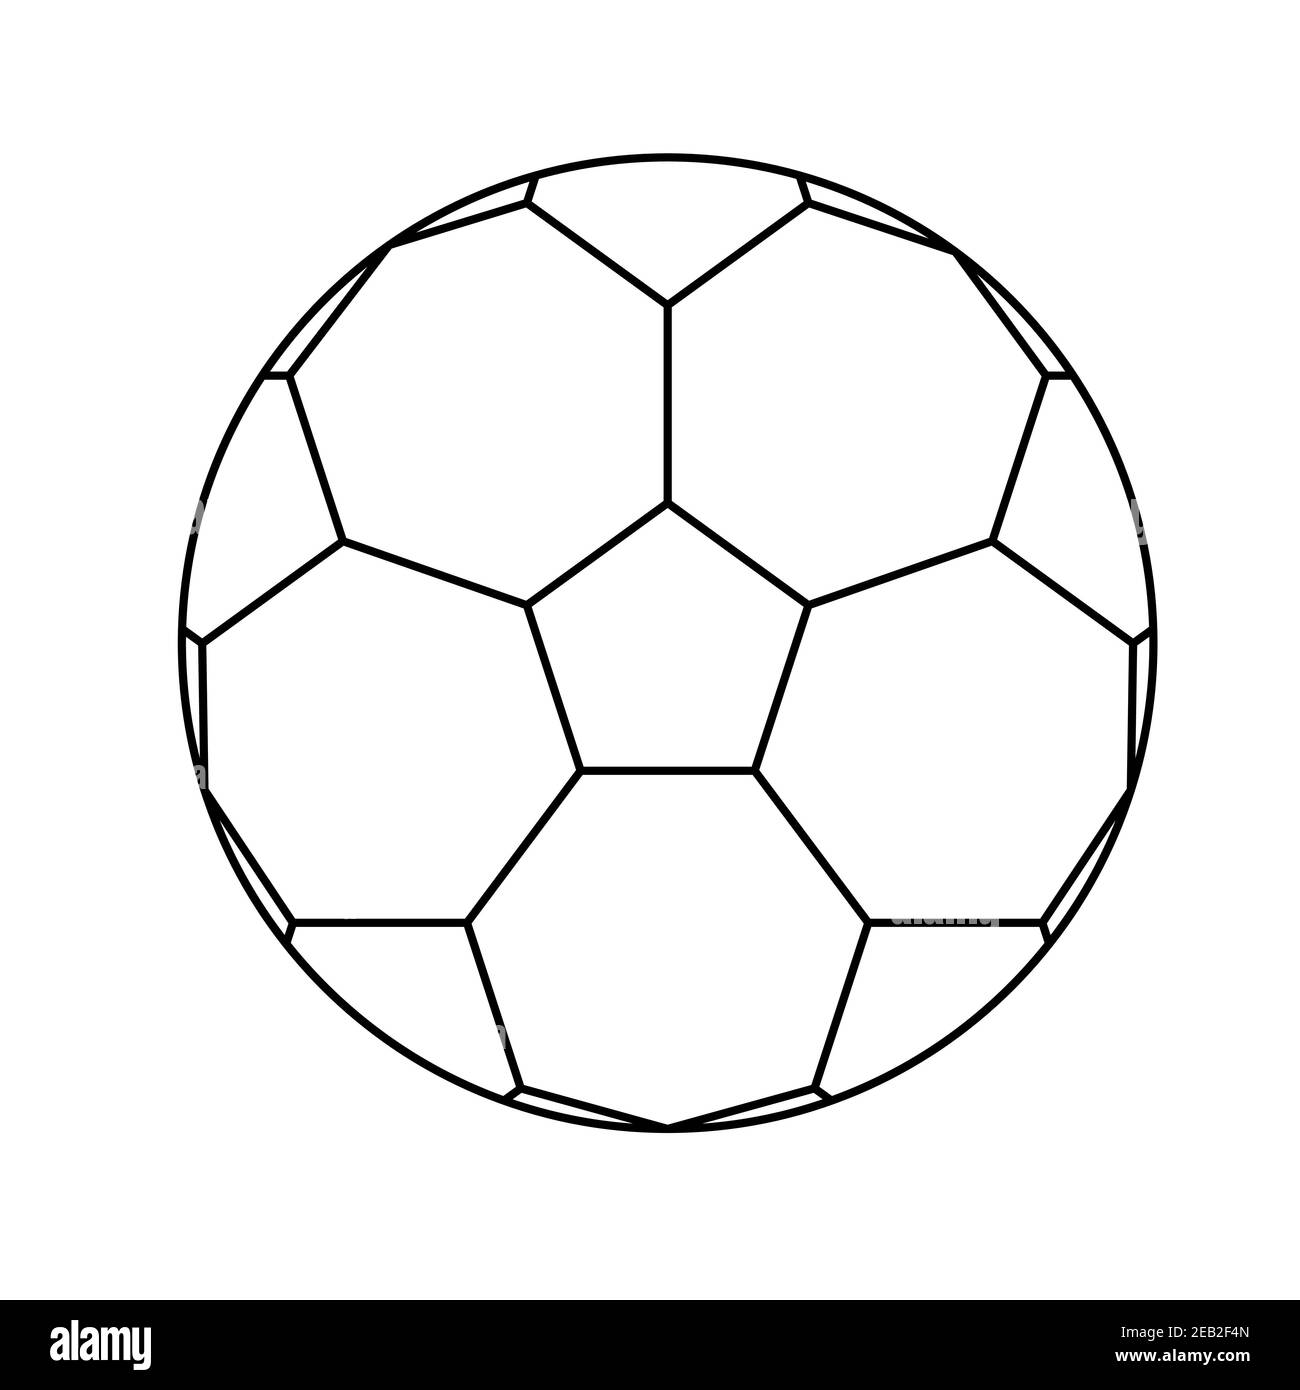 Football coloring book for kids activity vector illustration Stock Vector